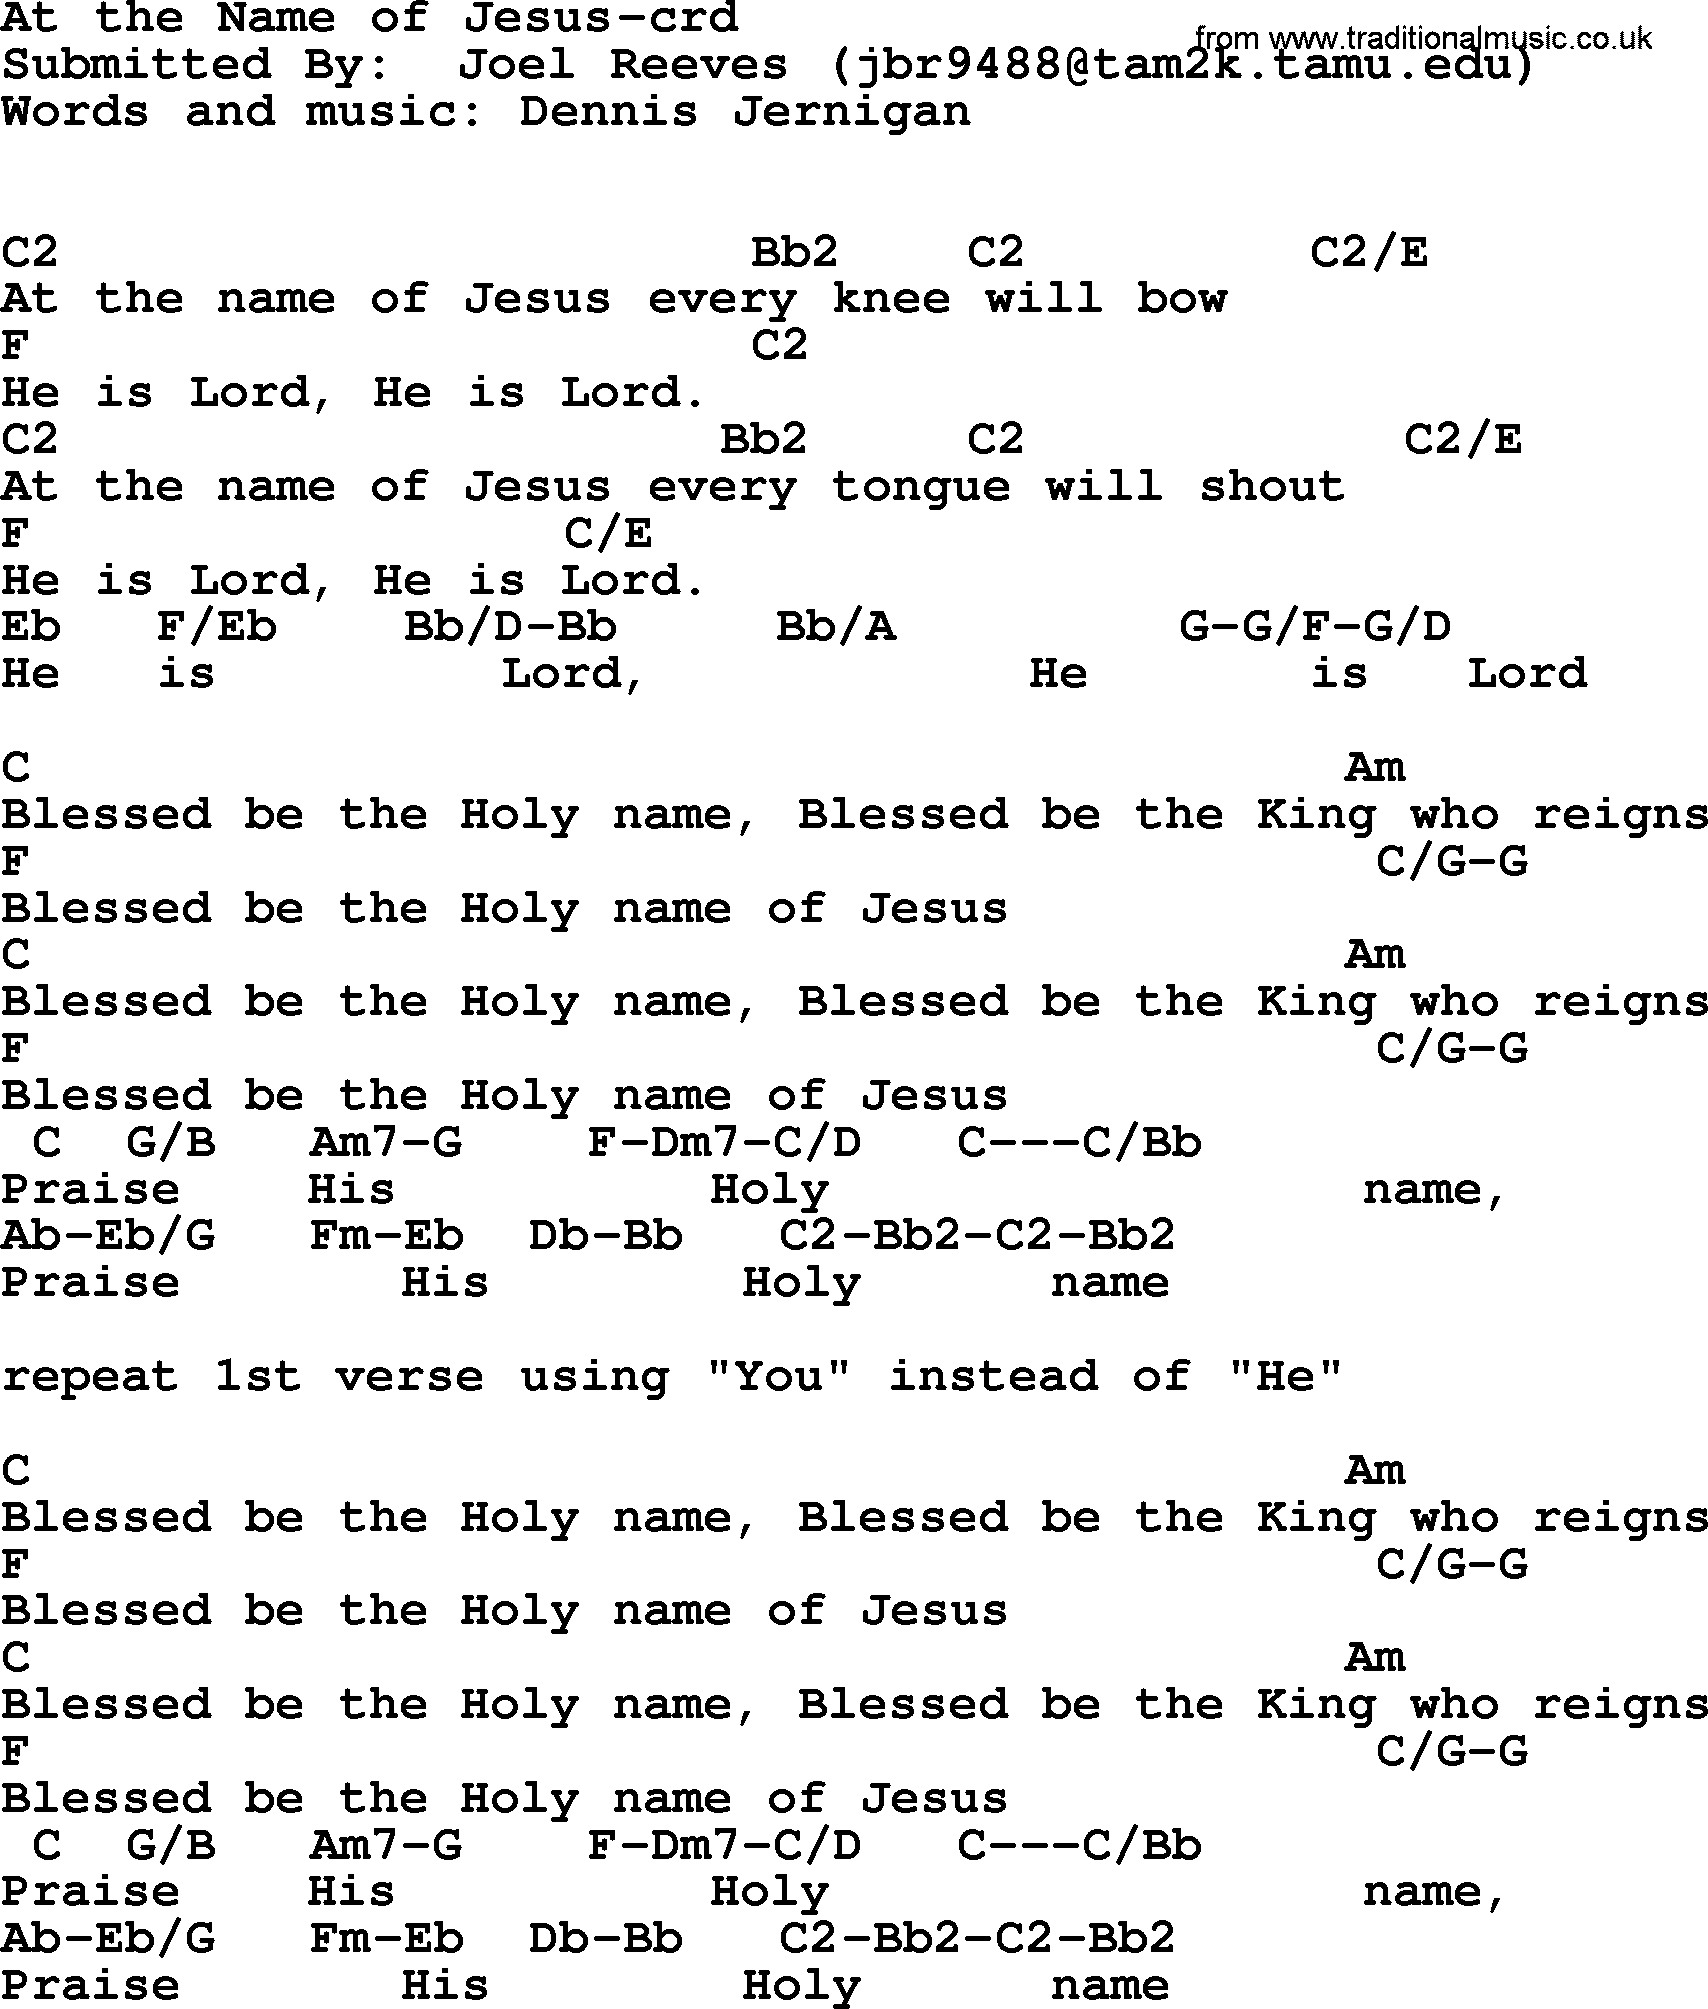 Top 500 Hymn: At The Name Of Jesus, lyrics and chords